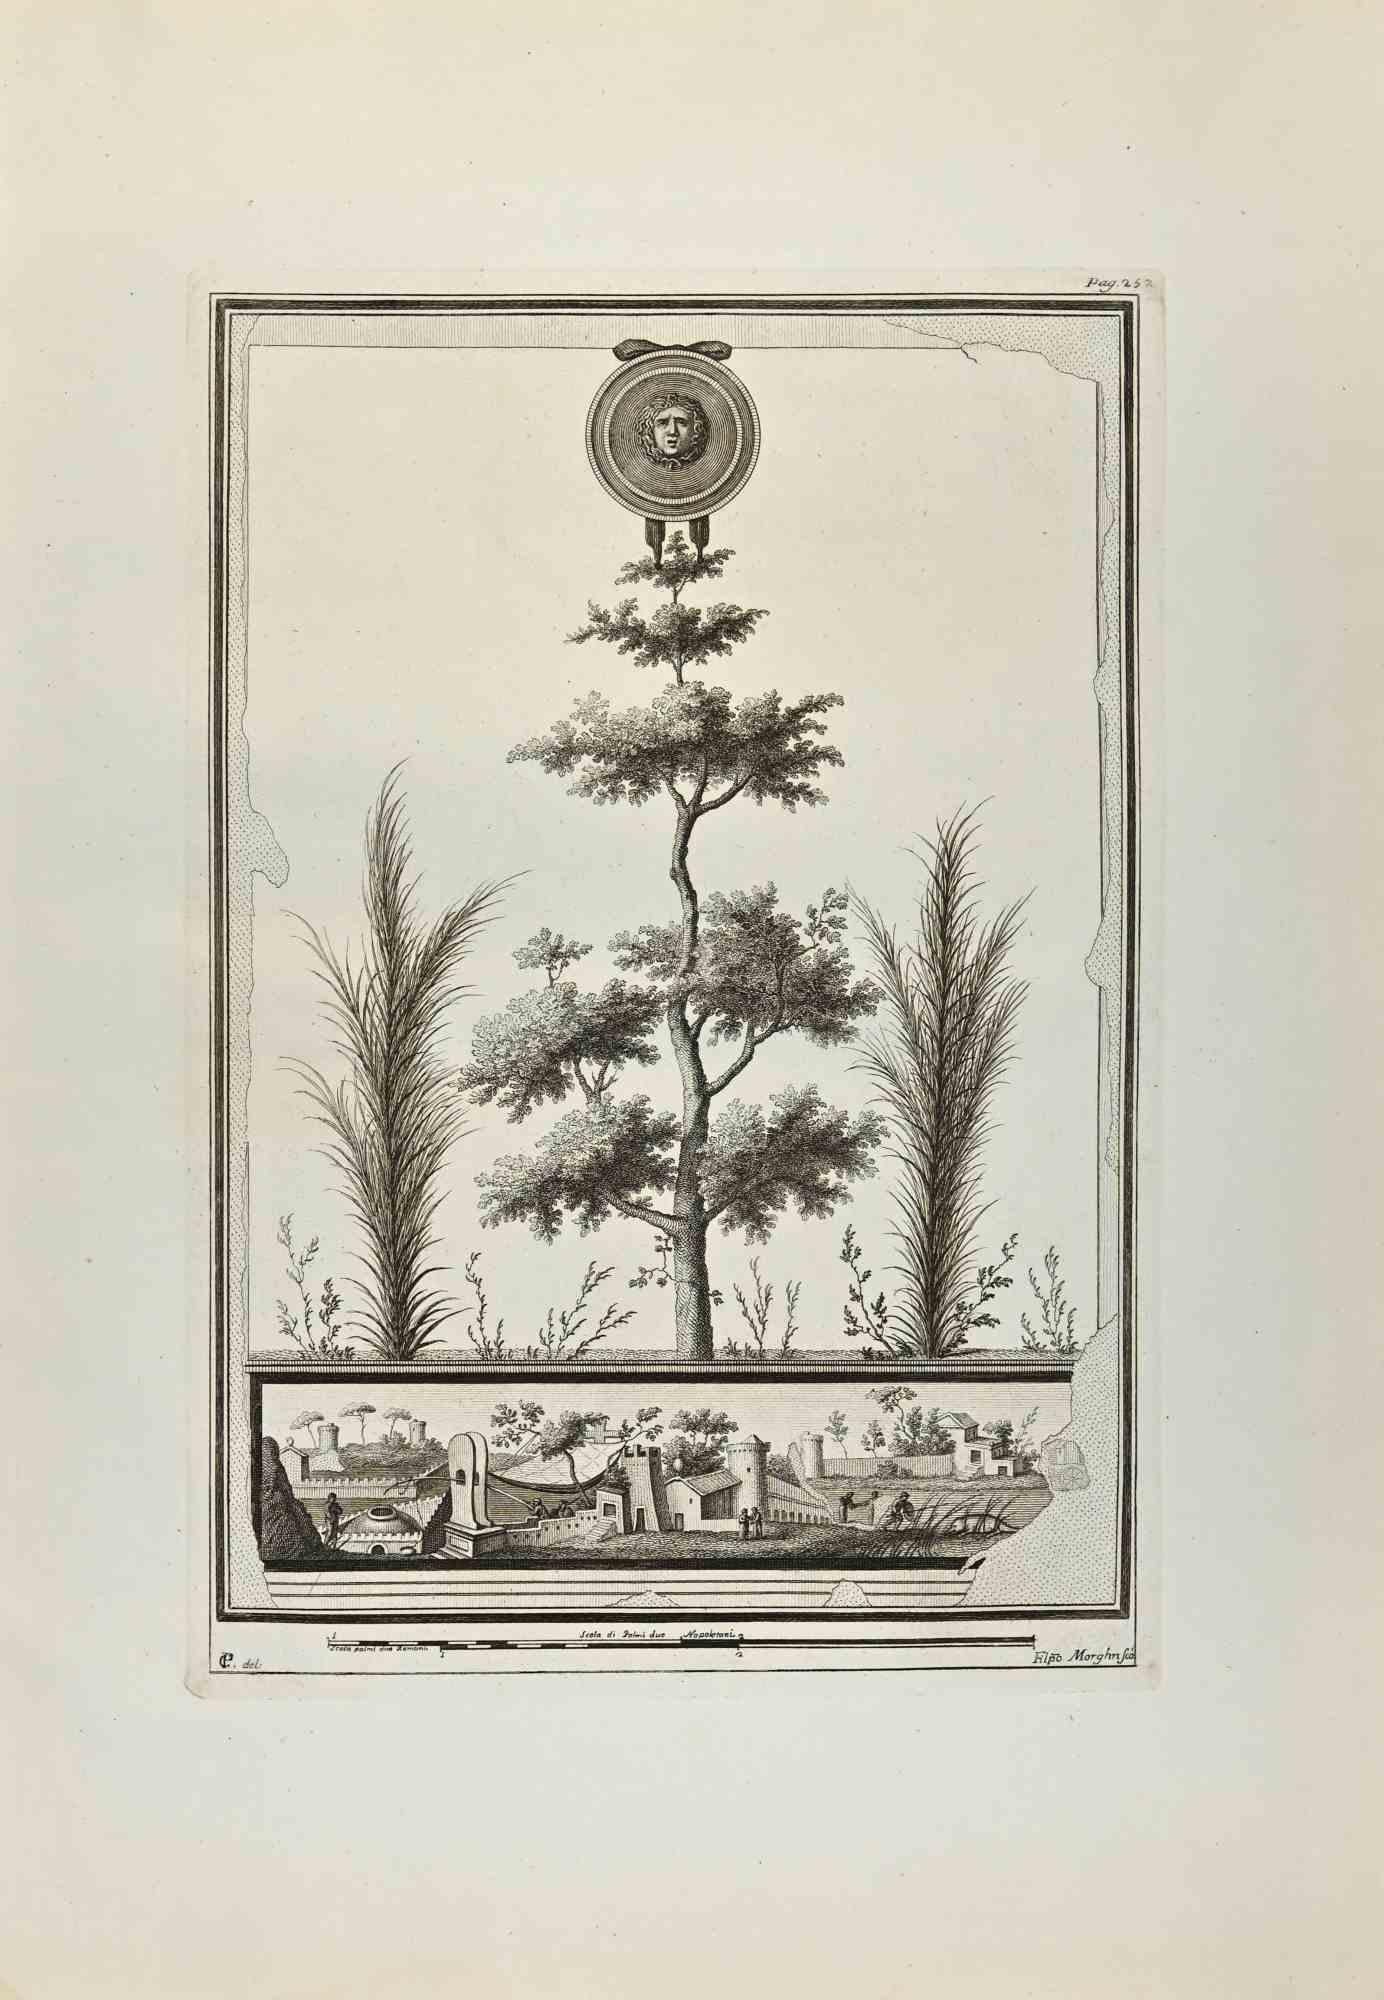 Medusa Head And Roman Garden from "Antiquities of Herculaneum" is an etching on paper realized by Filippo Morghen in the 18th Century.

Signed on the plate.

Good conditions with some folding.

The etching belongs to the print suite “Antiquities of